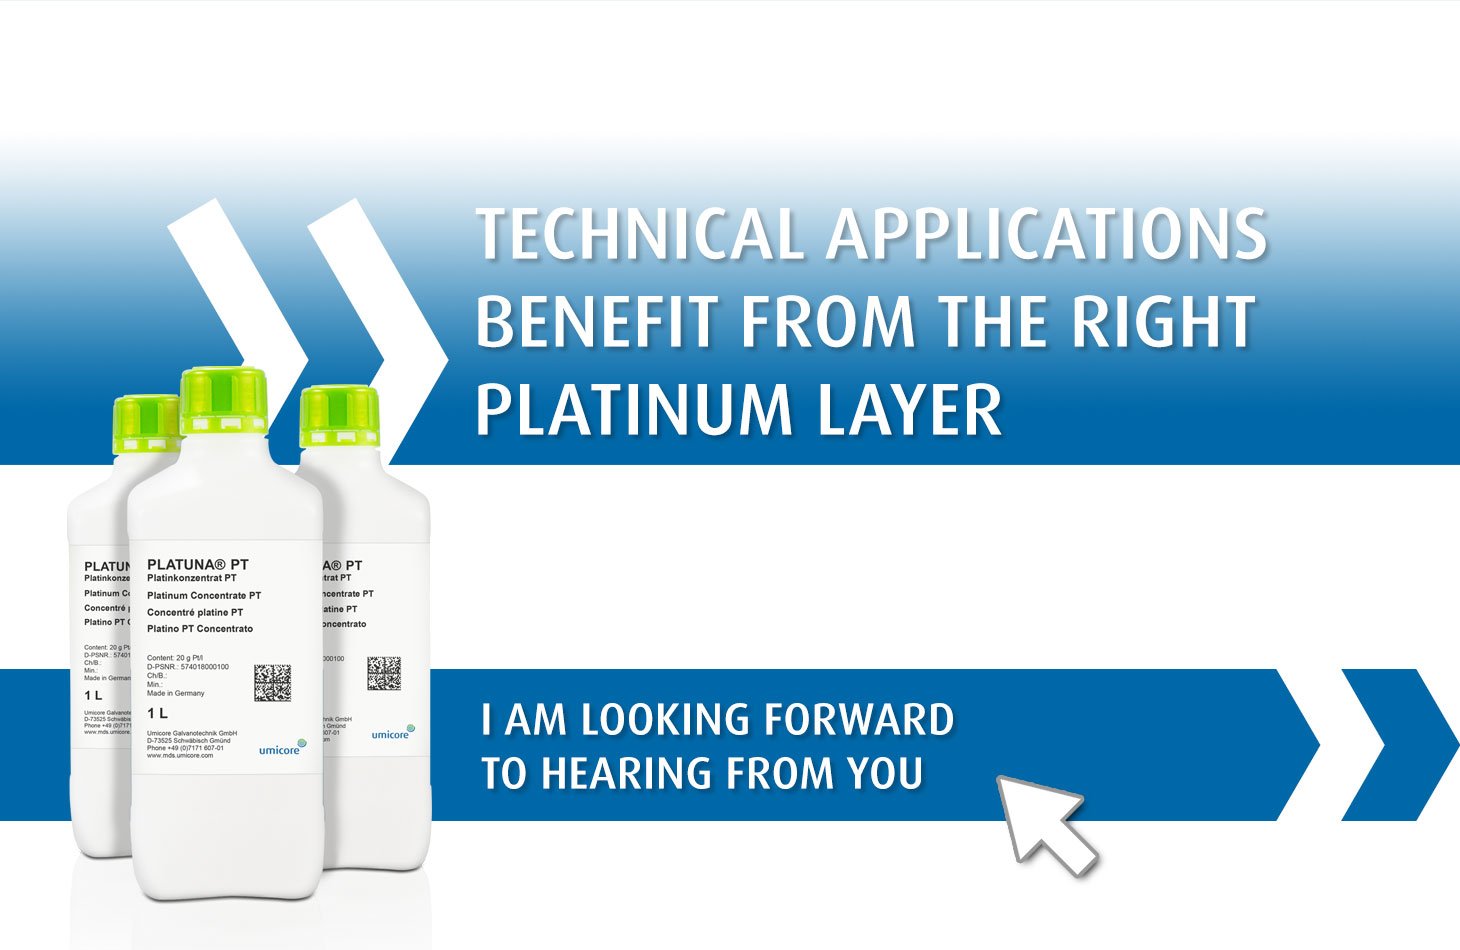 PLATUNA PT - New benchmark for platinum coating of technical applications - Umicore Metal Deposition Solutions - Contact us